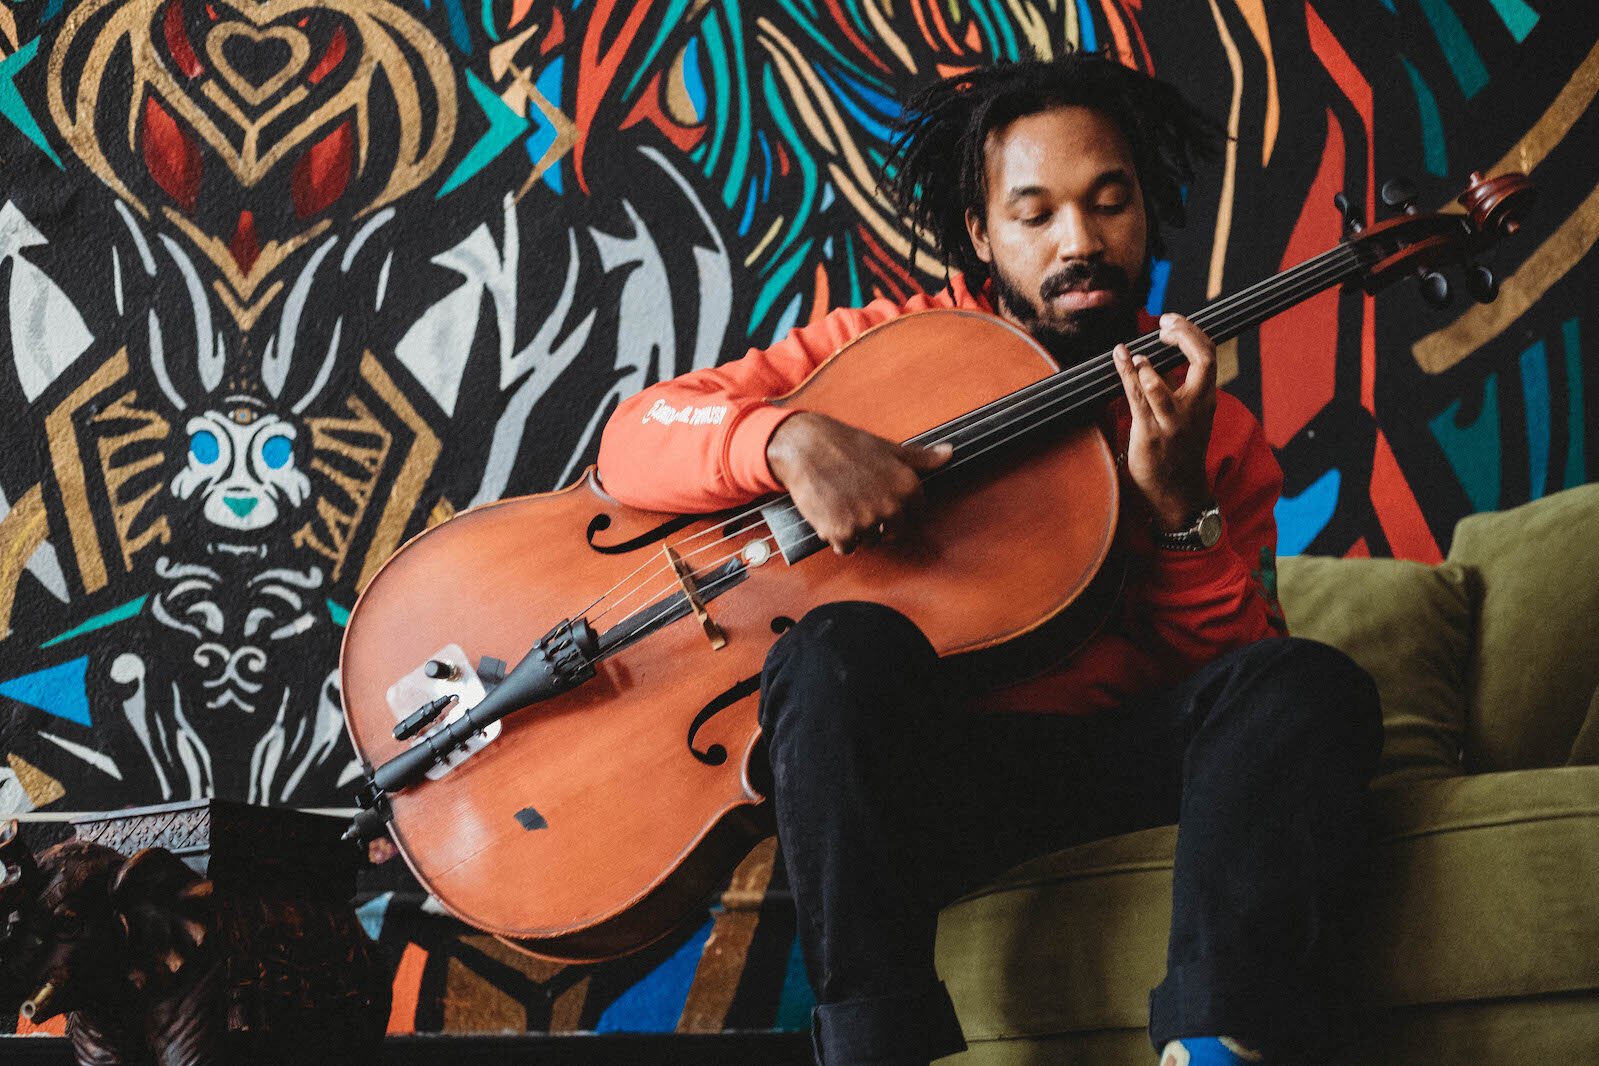 Cellist Jordan Hamilton's "Stockbridge" was inspired by his fears and hopes for a changing Edison Neighborhood and Kalamazoo.